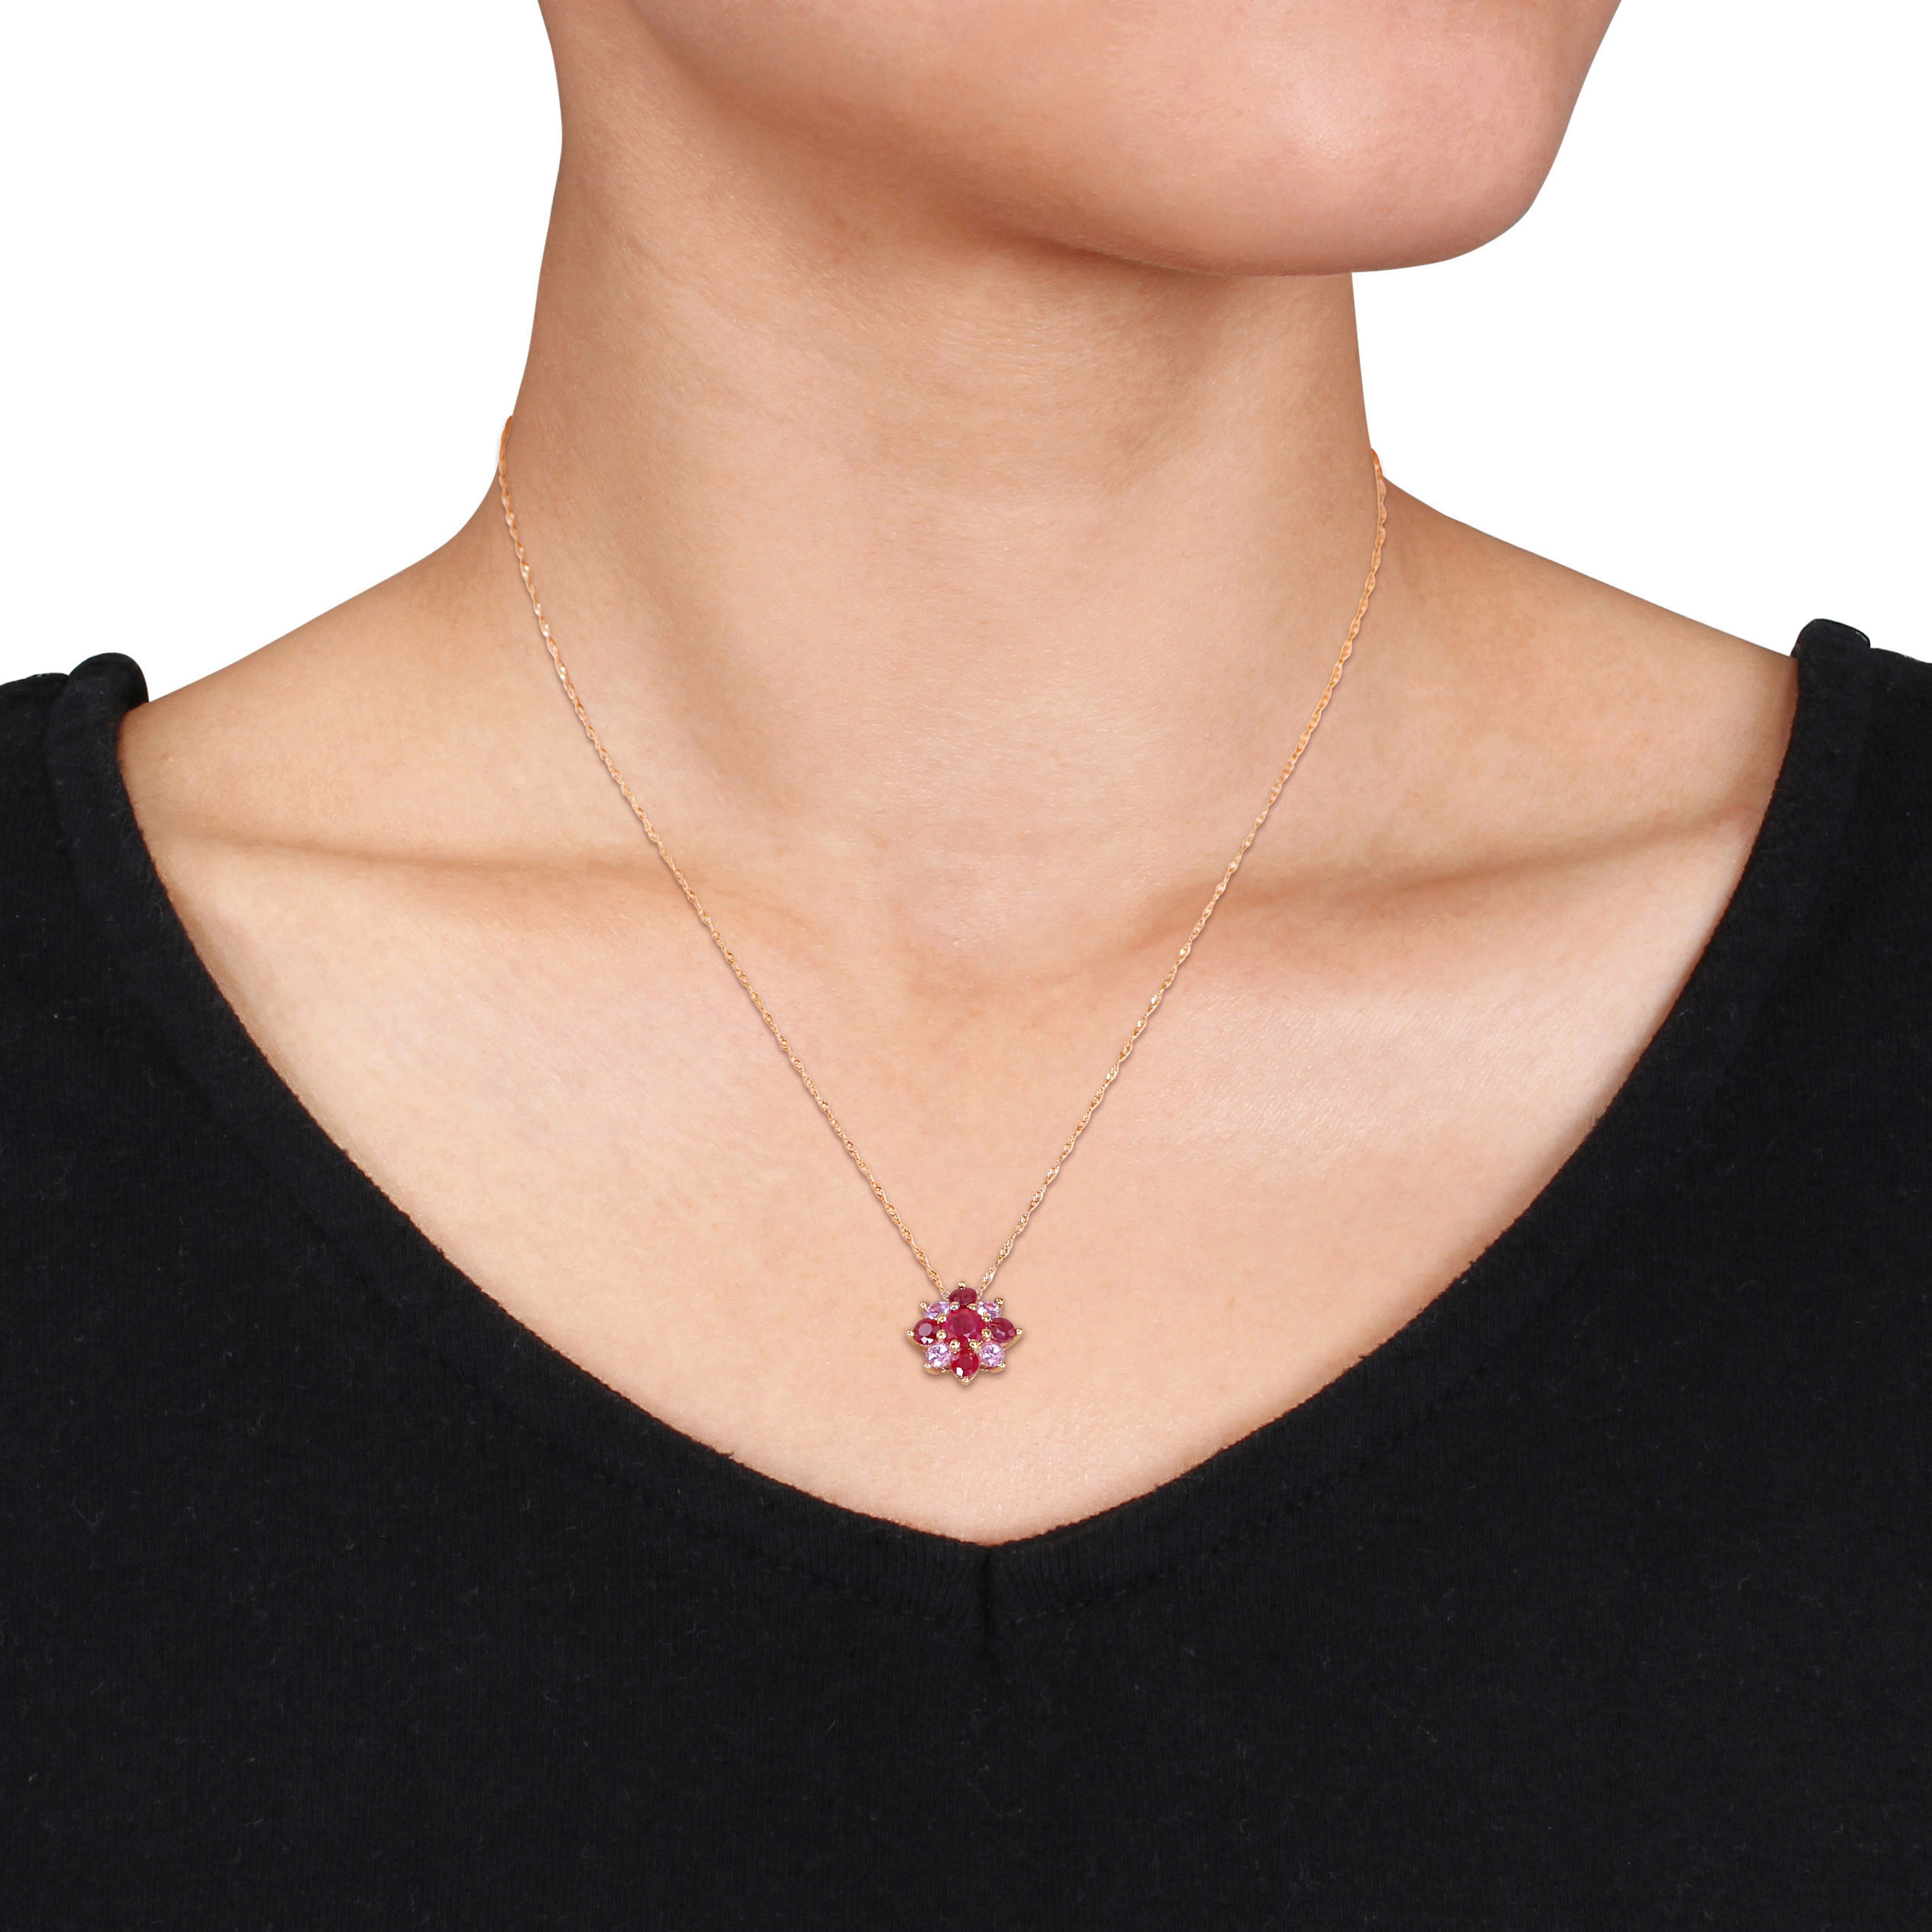 1 4/5 CT TGW Ruby and Pink Sapphire Clustered Star Pendant with Chain in 14k Rose Gold